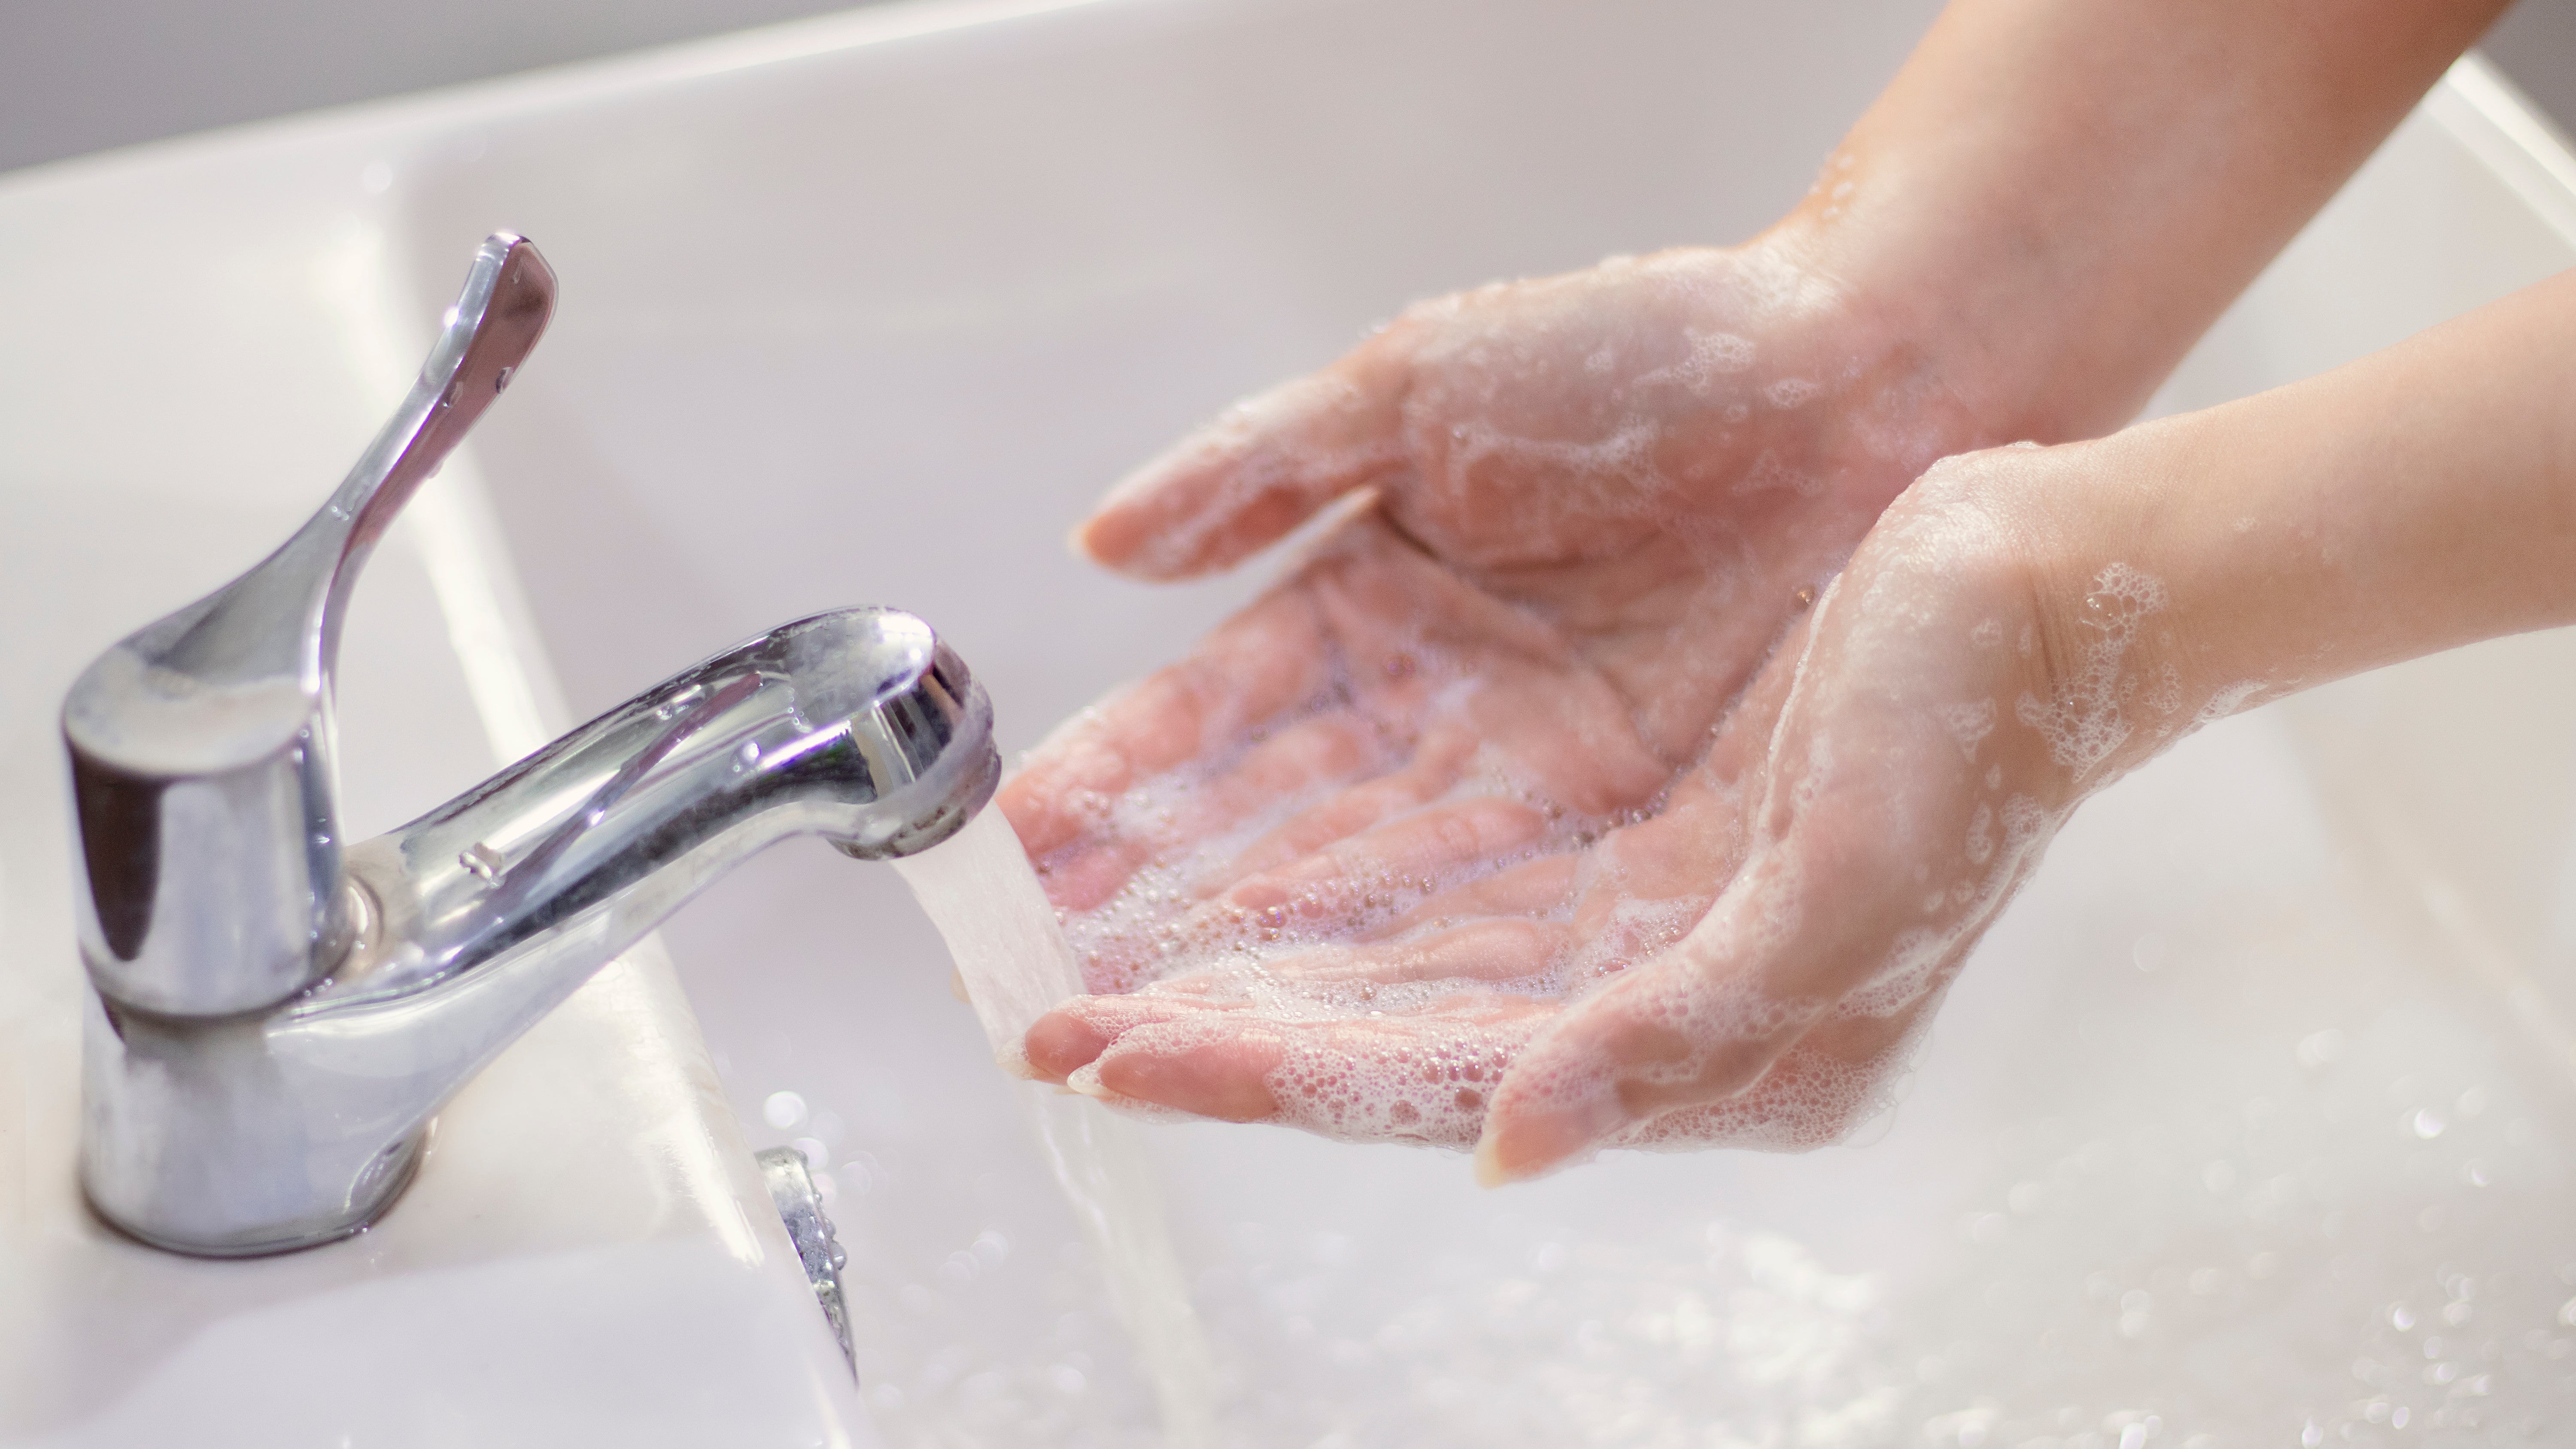 Turn Hand-Washing Into A Mindful Experience